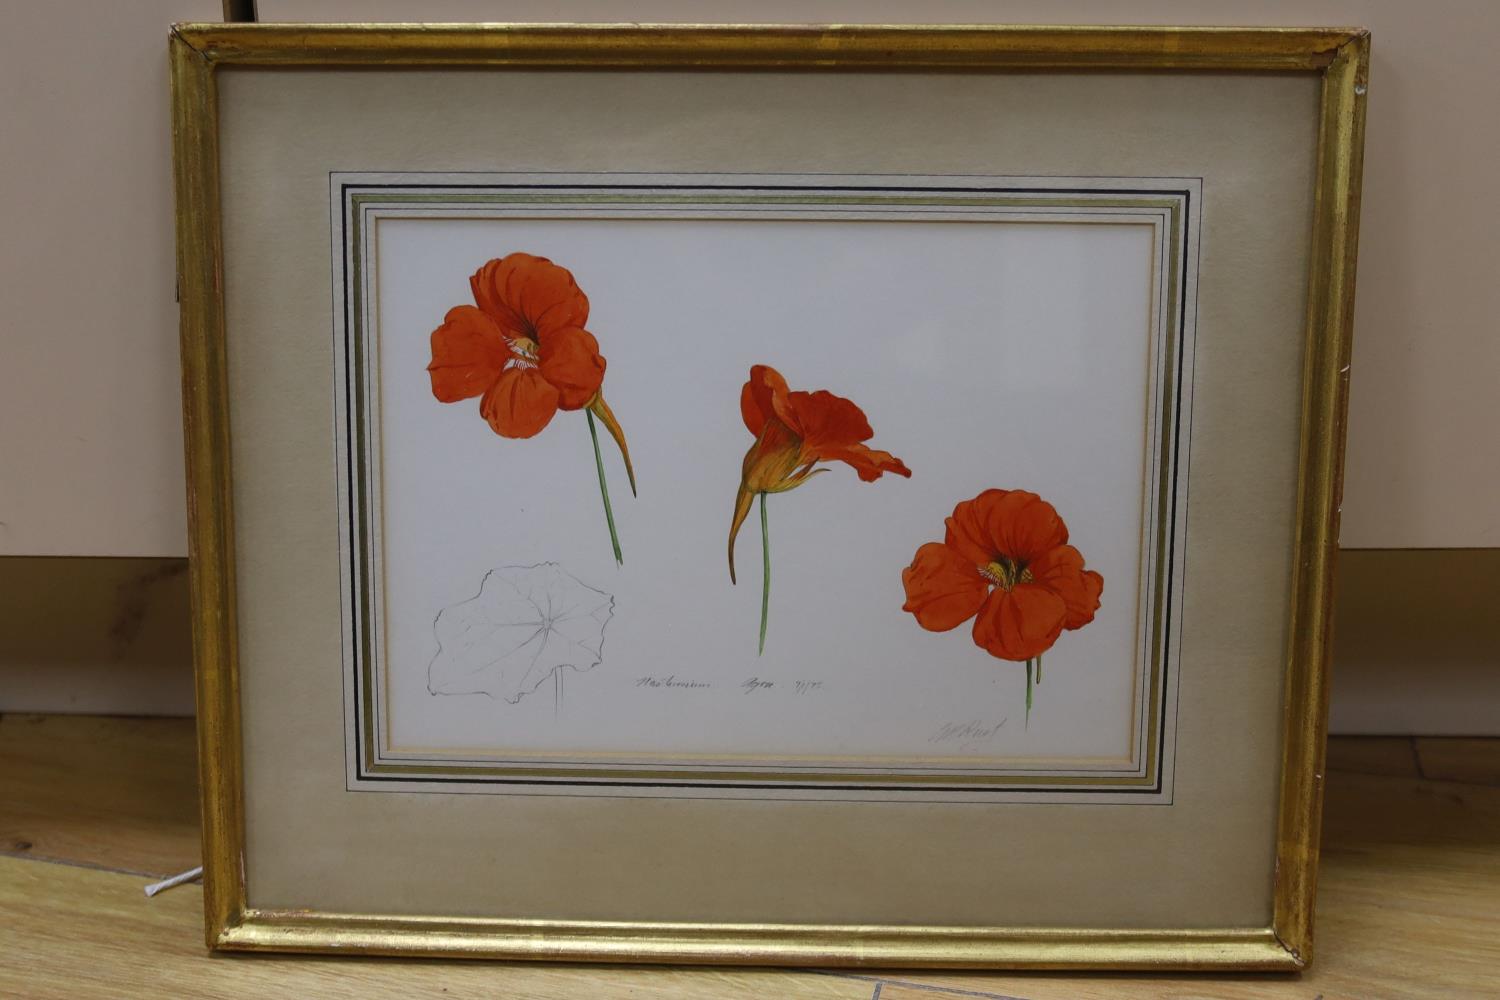 Graham Rust (1942-), pencil and watercolour, Nasturtium, Agra, 7/1/75, signed with Spink label - Image 2 of 5